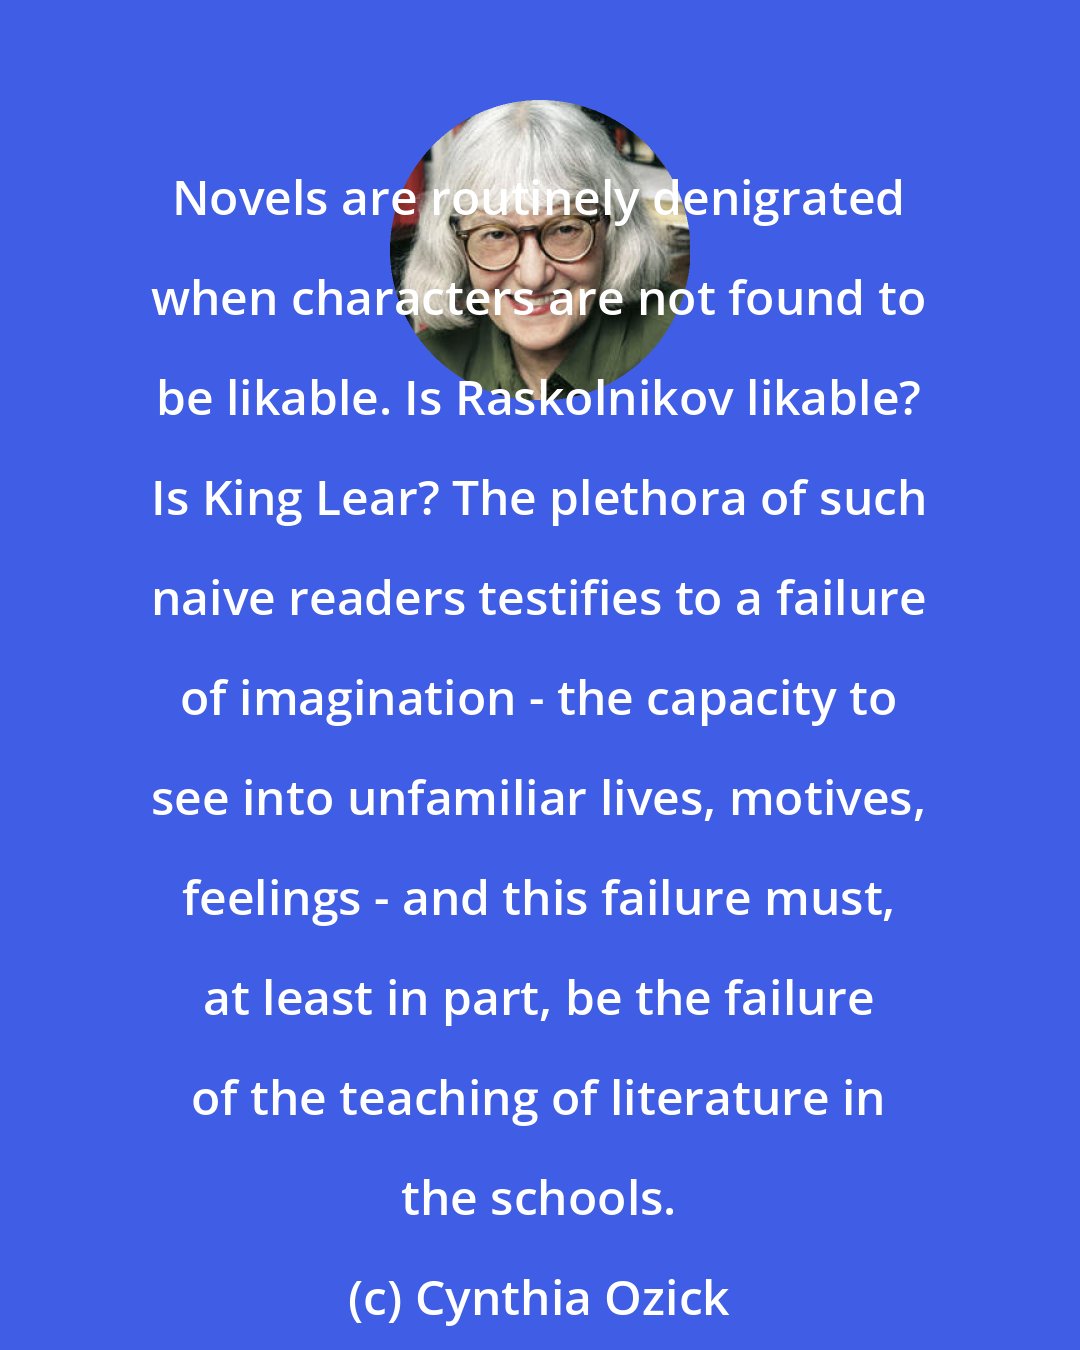 Cynthia Ozick: Novels are routinely denigrated when characters are not found to be likable. Is Raskolnikov likable? Is King Lear? The plethora of such naive readers testifies to a failure of imagination - the capacity to see into unfamiliar lives, motives, feelings - and this failure must, at least in part, be the failure of the teaching of literature in the schools.